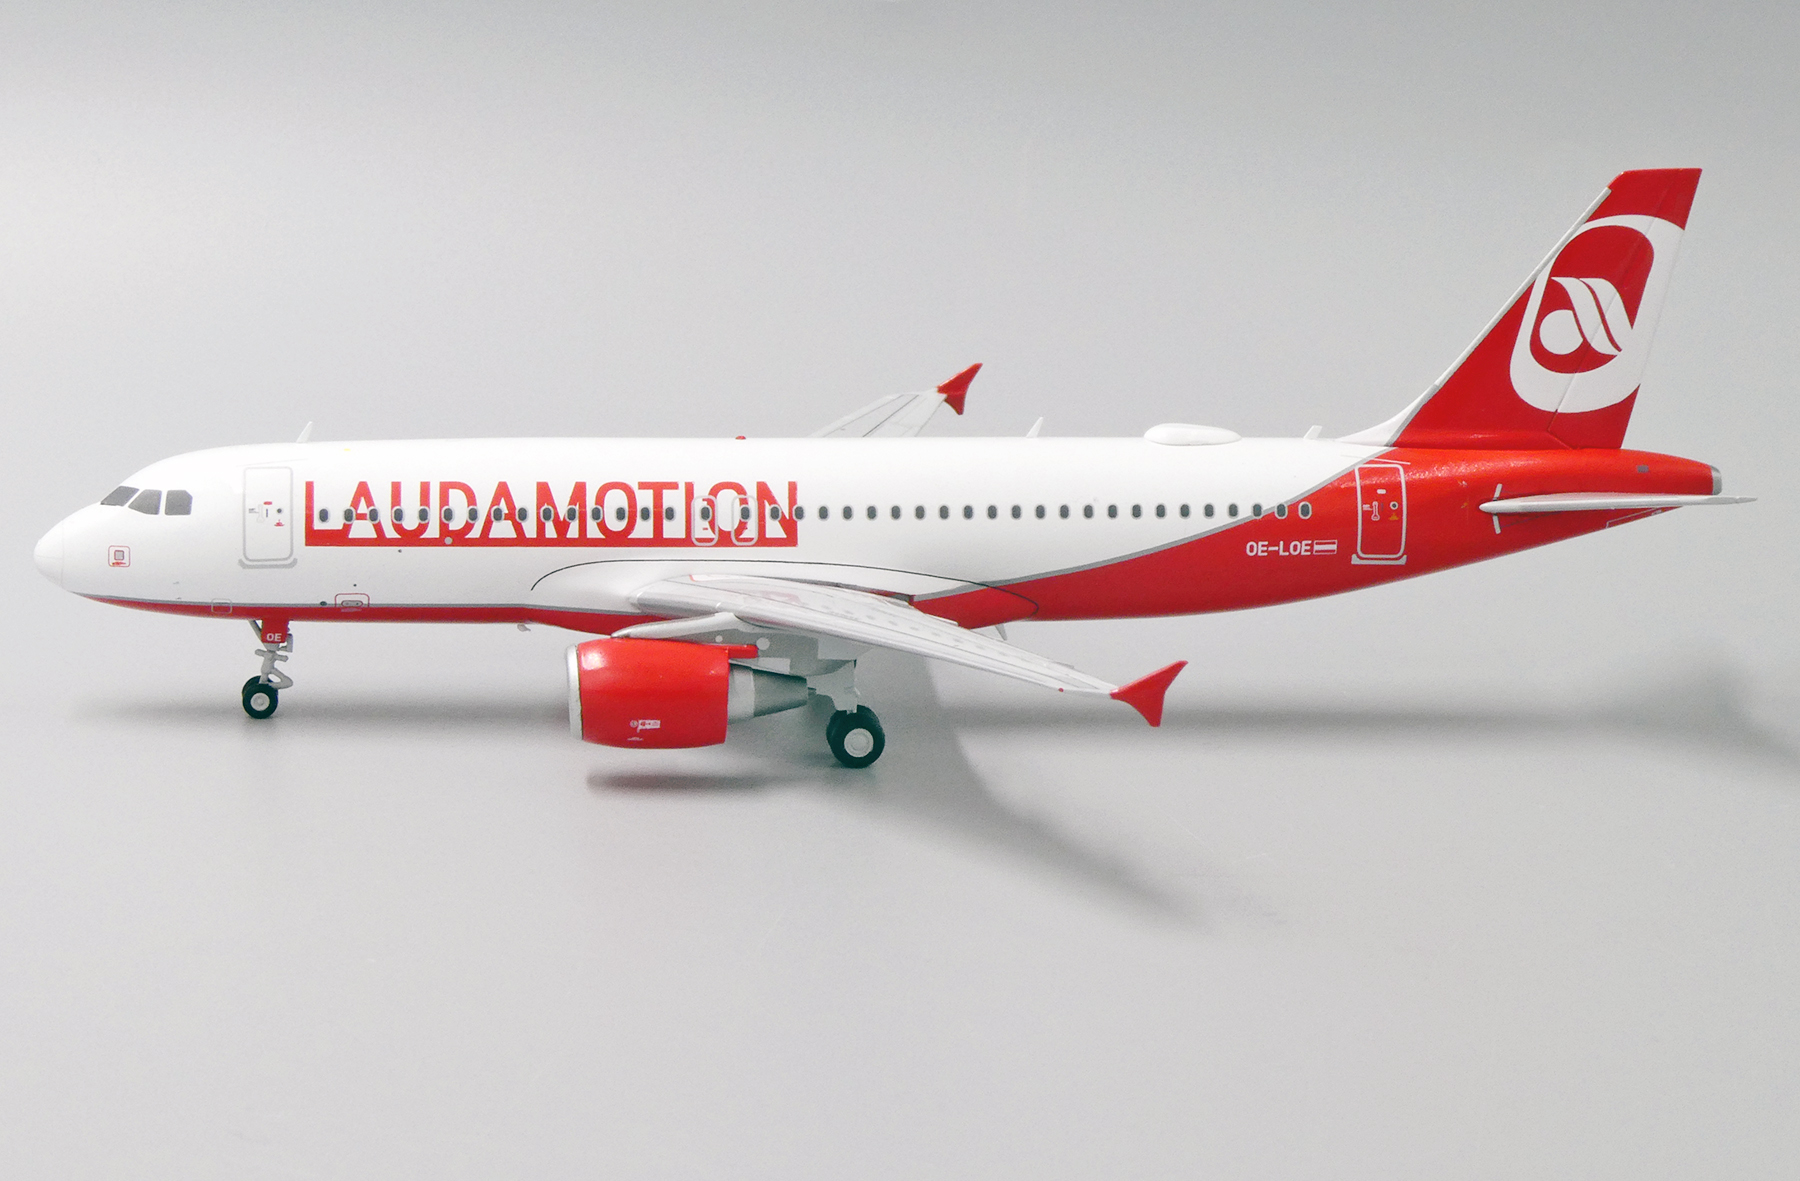 show original title Details about   Model airplane lauda Air Airbus a320 1:200 scale model collection oe-lob